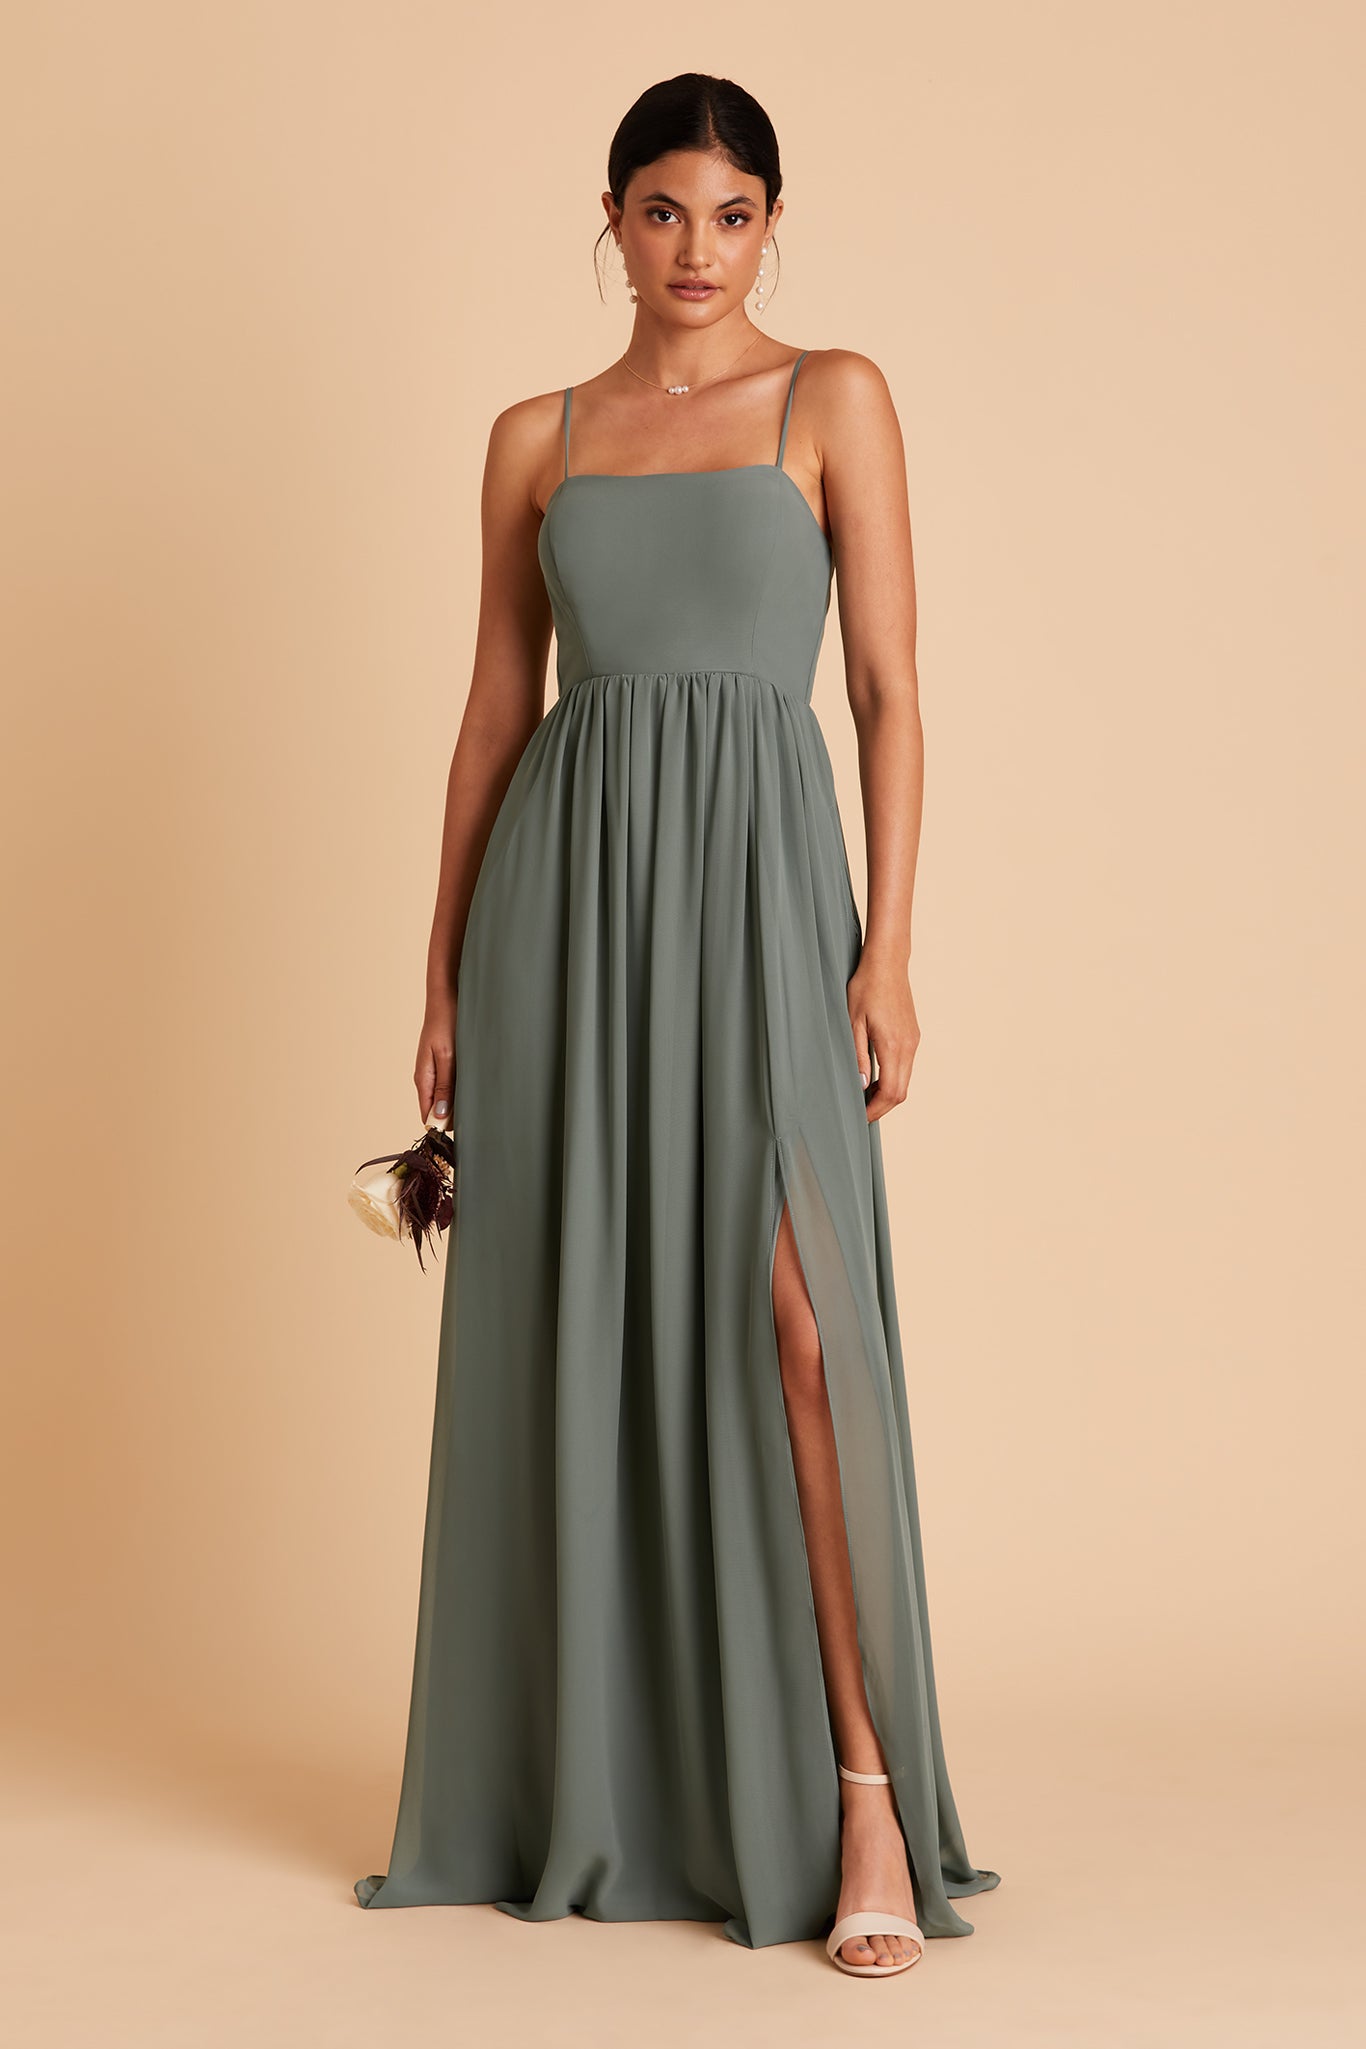 Sea Glass August Convertible Dress by Birdy Grey